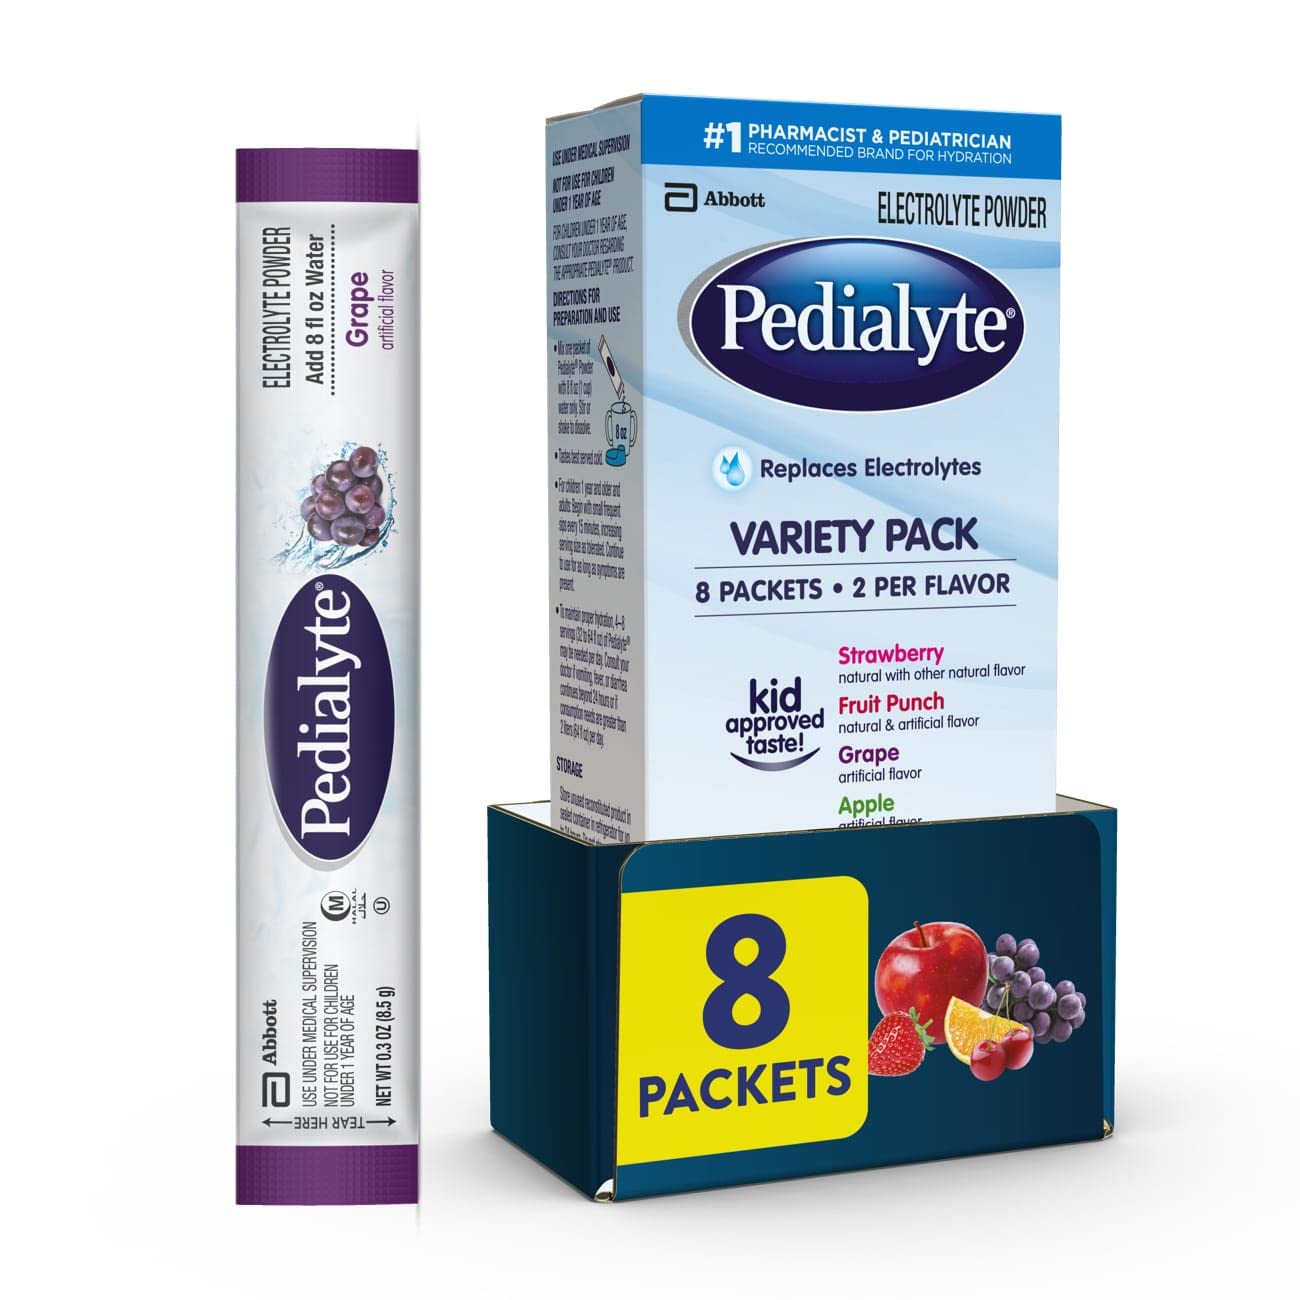 Pedialyte Electrolyte Powder Packets, Variety Pack, Hydration Drink, 8 Single-Serving Powder Packets - 8.5G each - Medaid - Lebanon